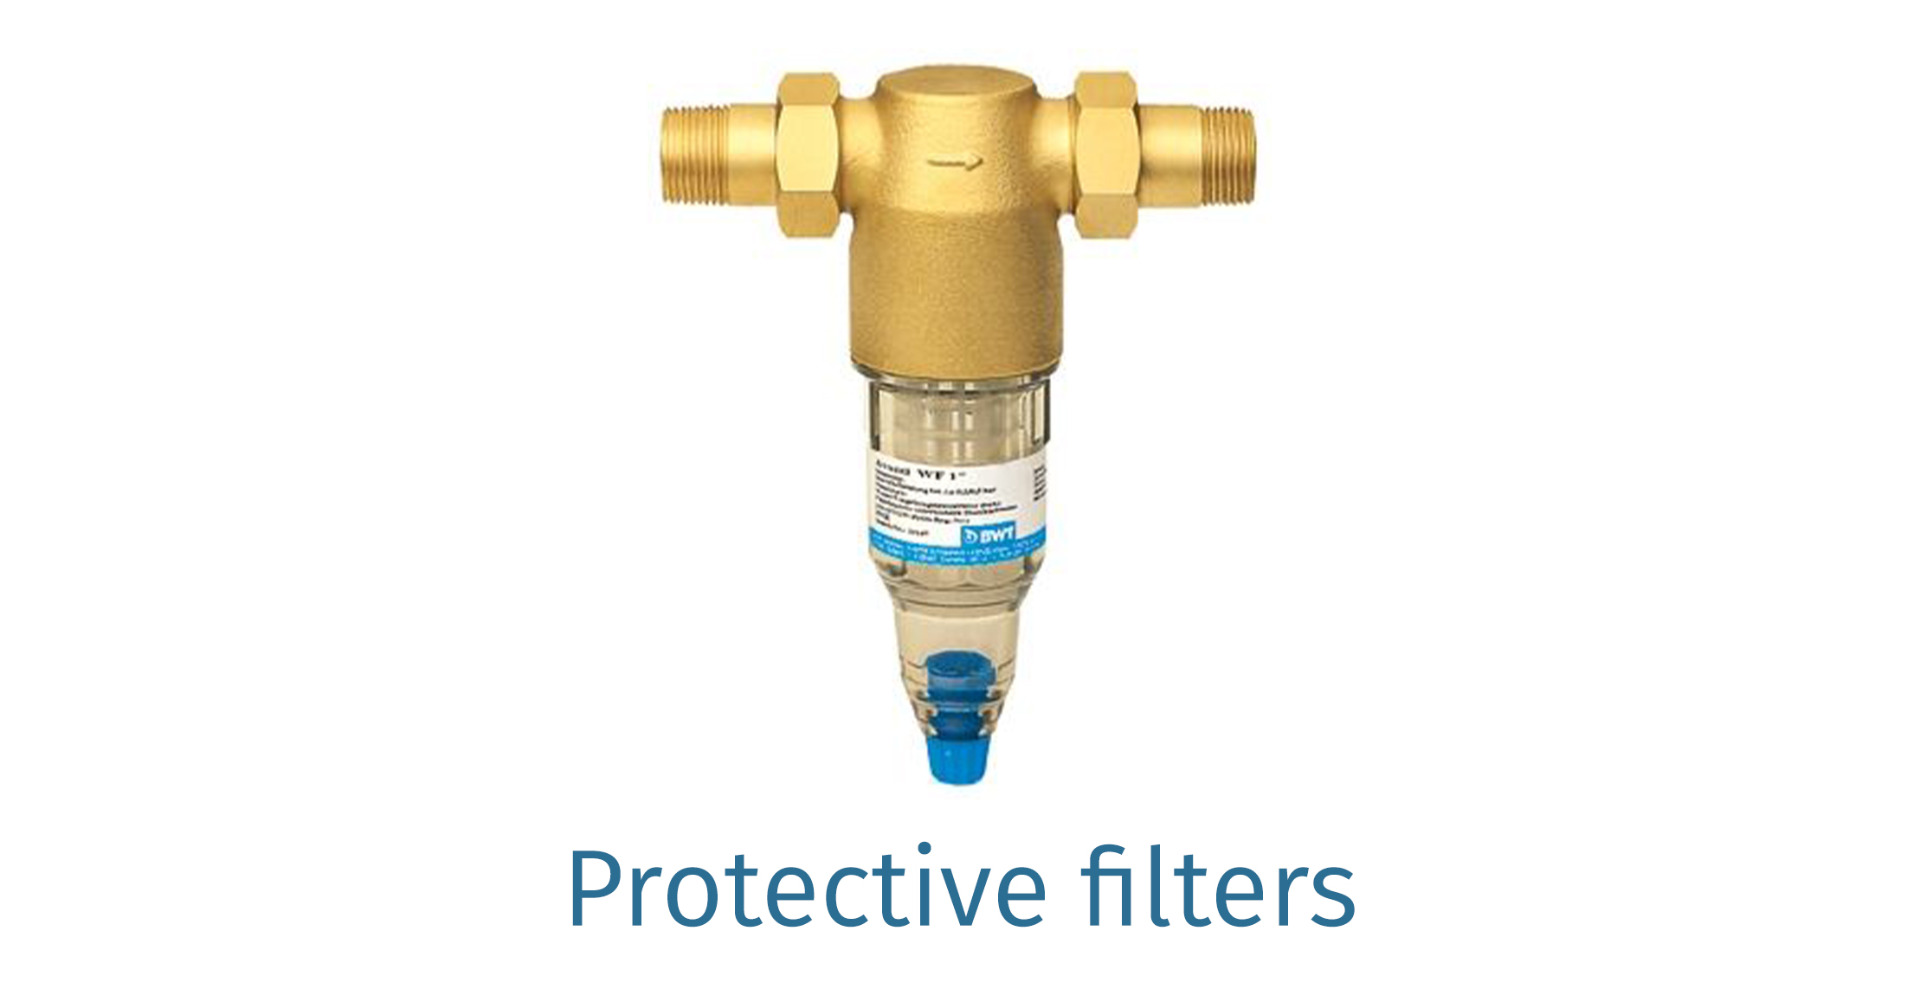 Protection filters